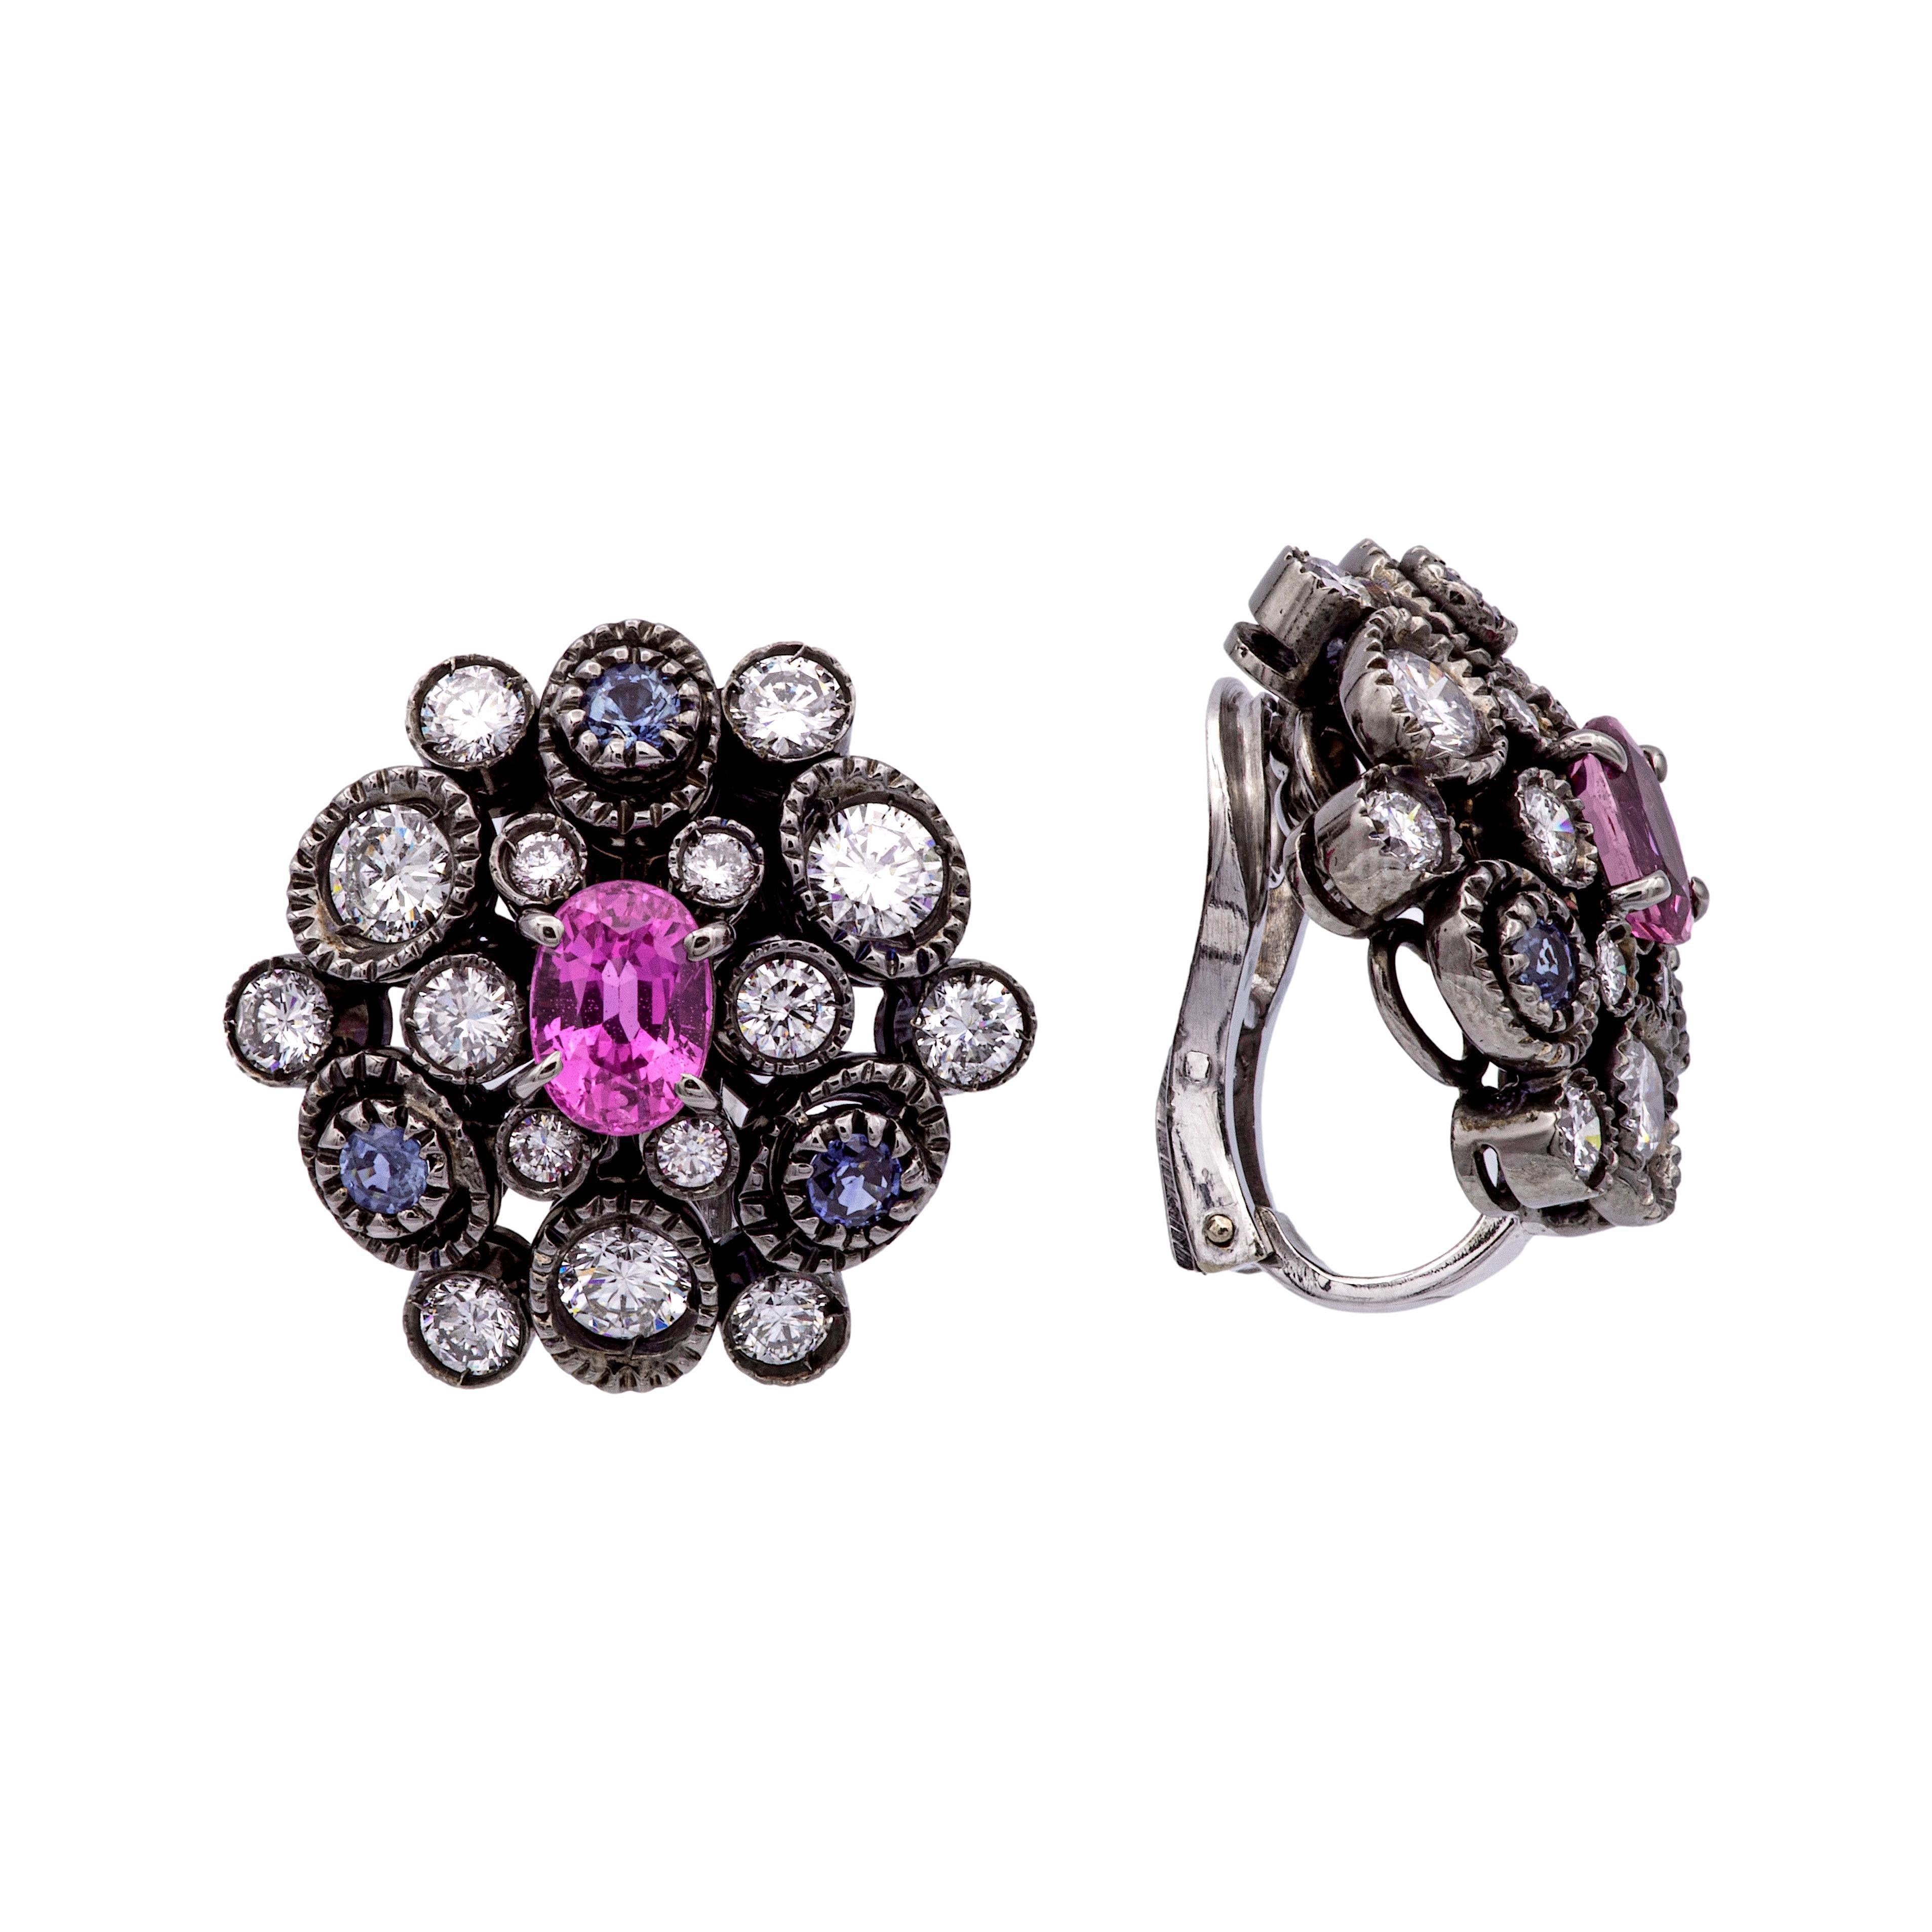 Pair of cluster earrings finely crafted in black rhodium on top of 18 karat white gold featuring an oval pink sapphire center set in claw prongs , each weighing an approximate of 0.75 carats adorned by 6 round blue sapphire intermixing with 30 round